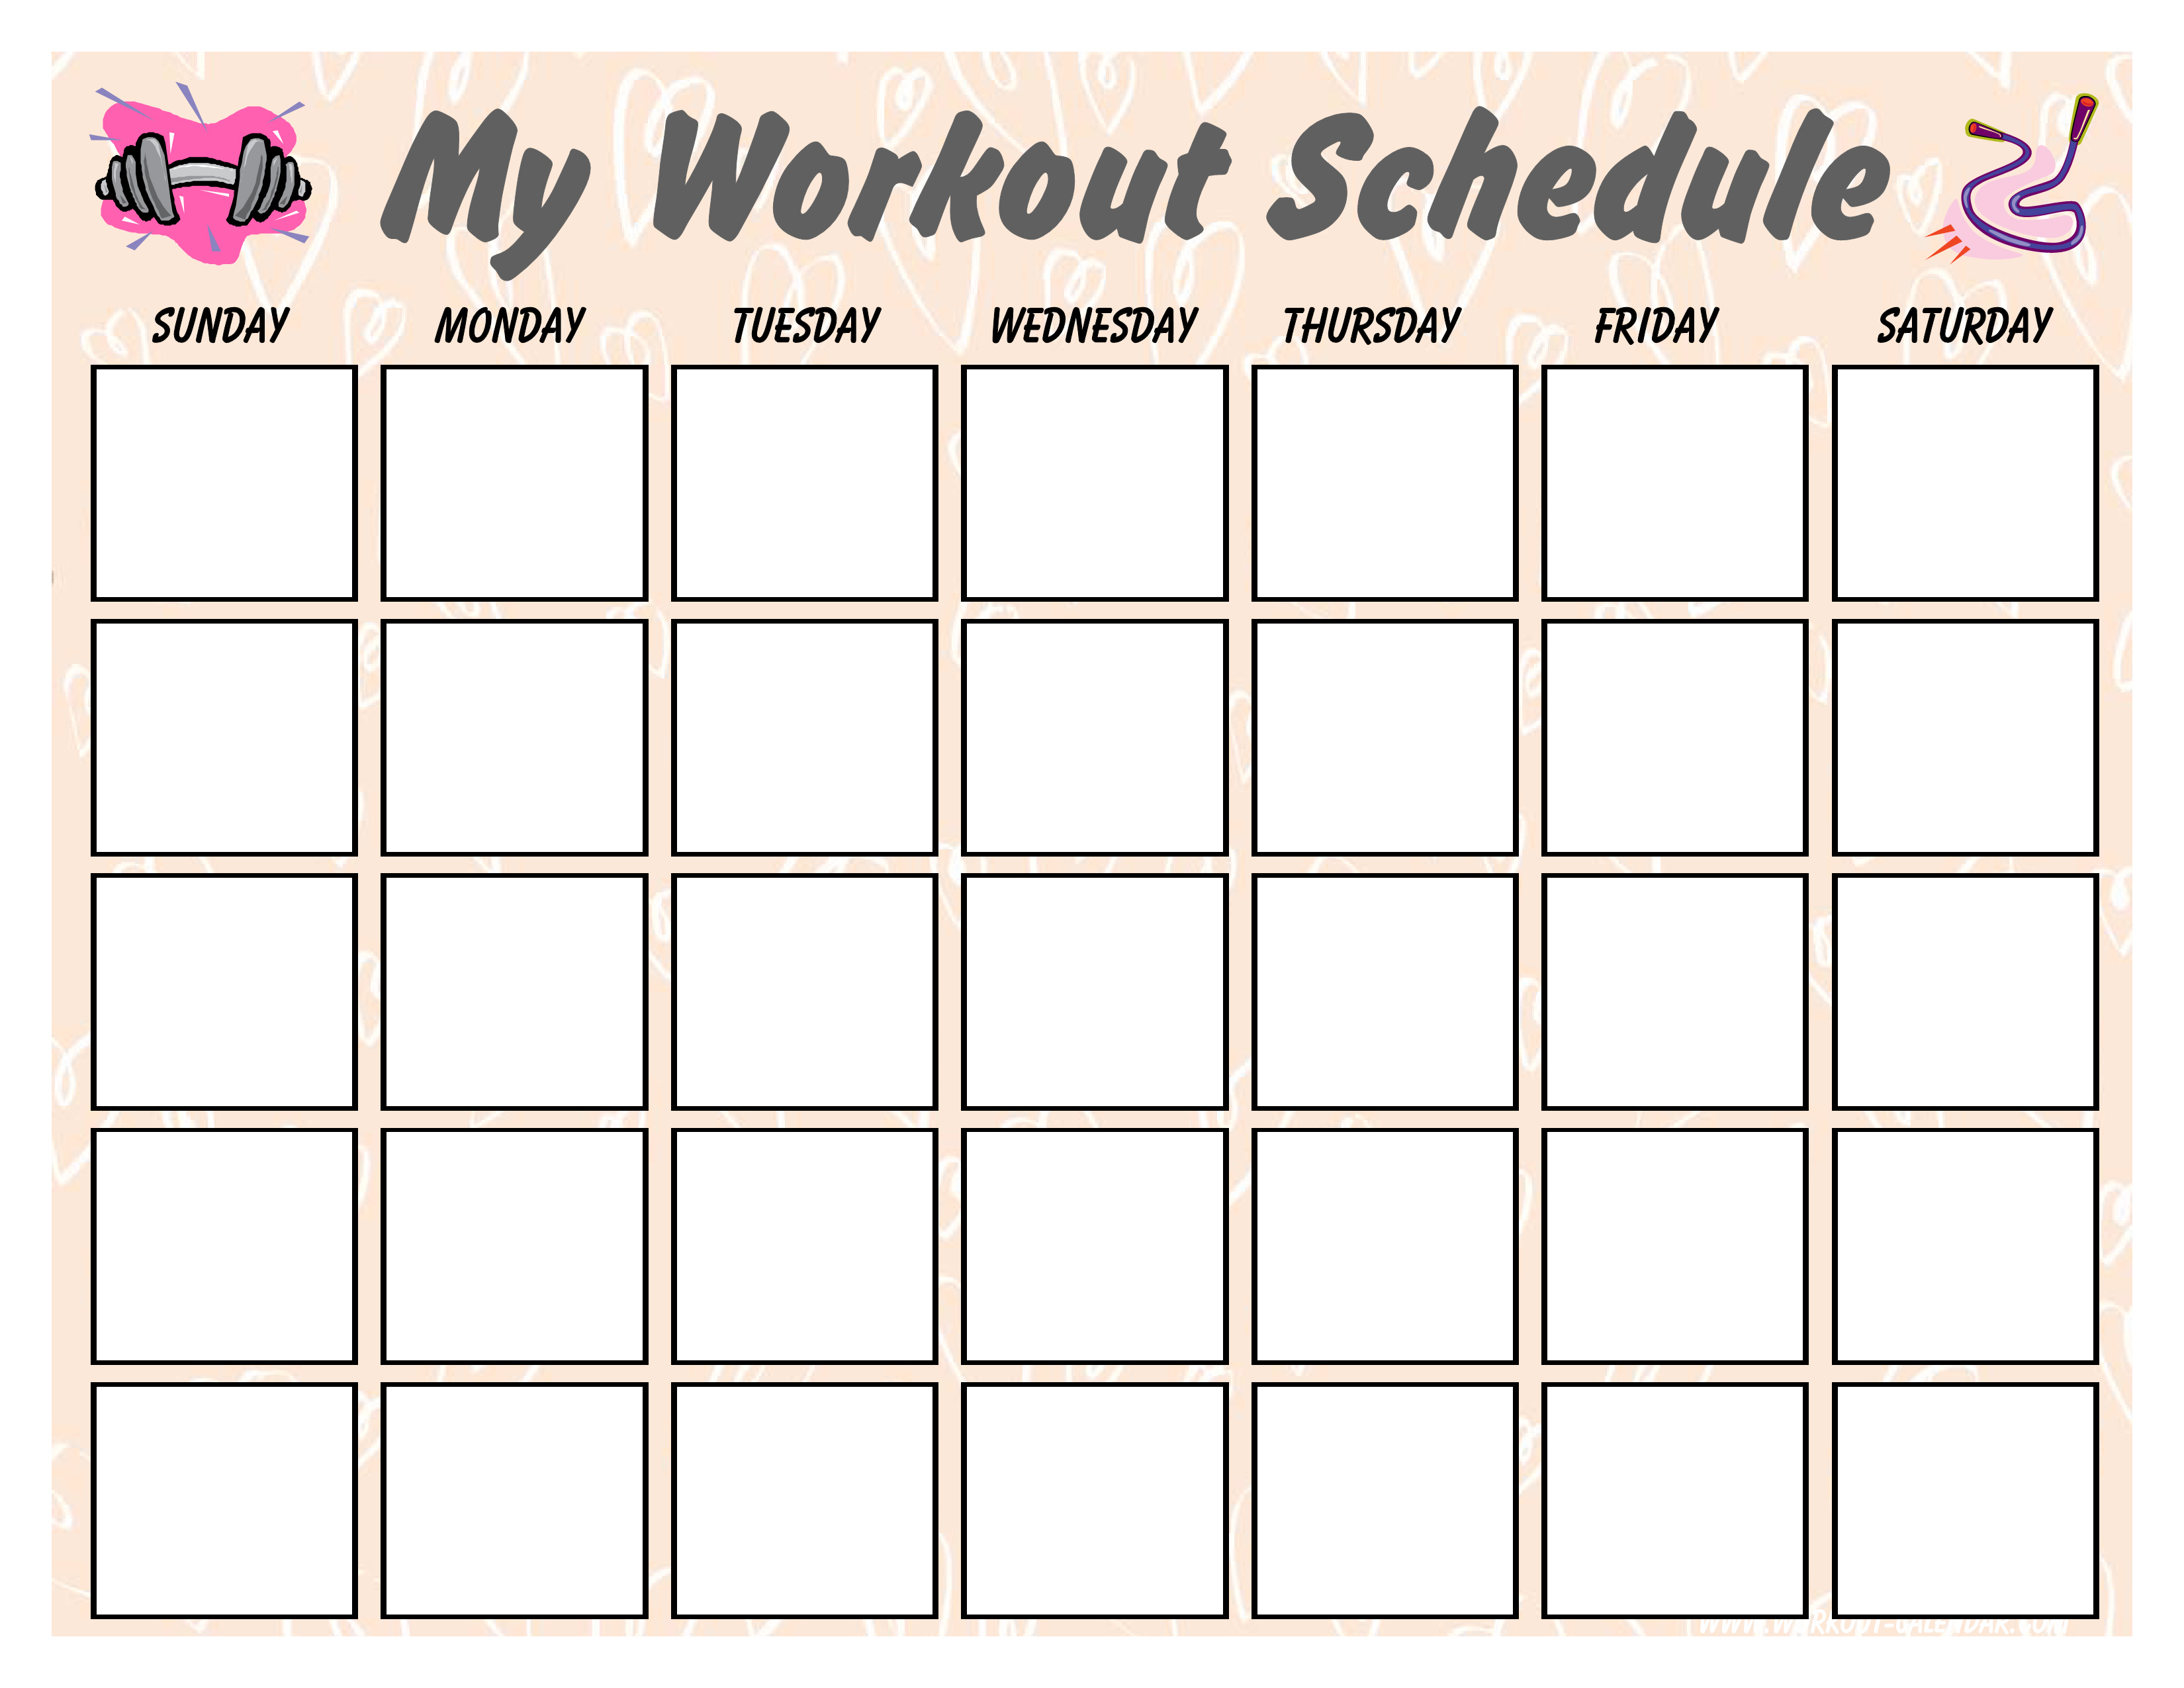 Blank Workout Schedule For Women Templates At Allbusinesstemplates